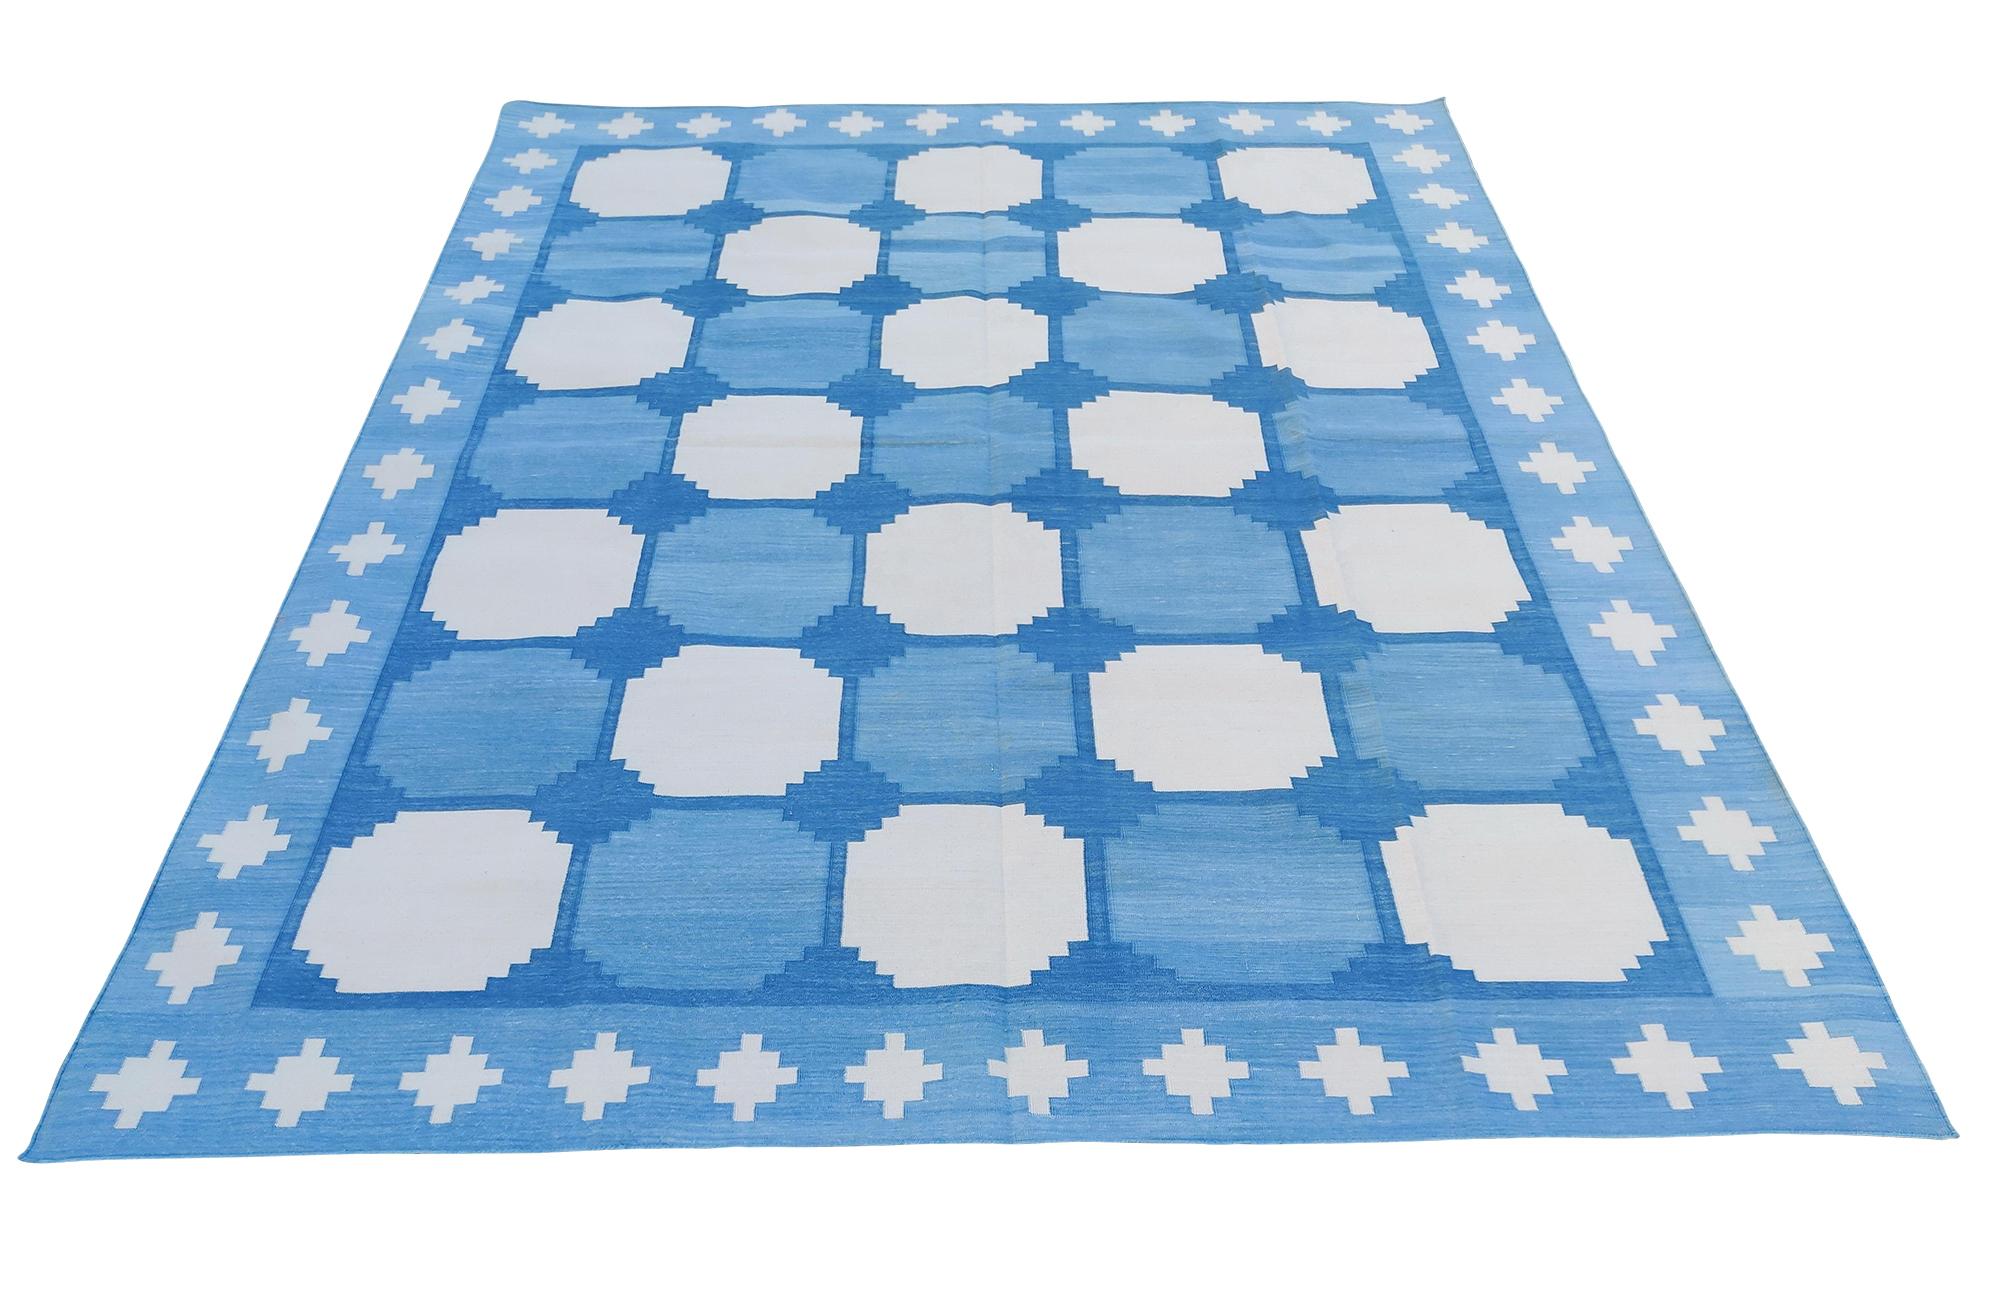 Cotton Natural Vegetable Dyed, Sky Blue And Cream Tile Patterned Indian Rug-8'x10'

These special flat-weave dhurries are hand-woven with 15 ply 100% cotton yarn. Due to the special manufacturing techniques used to create our rugs, the size and